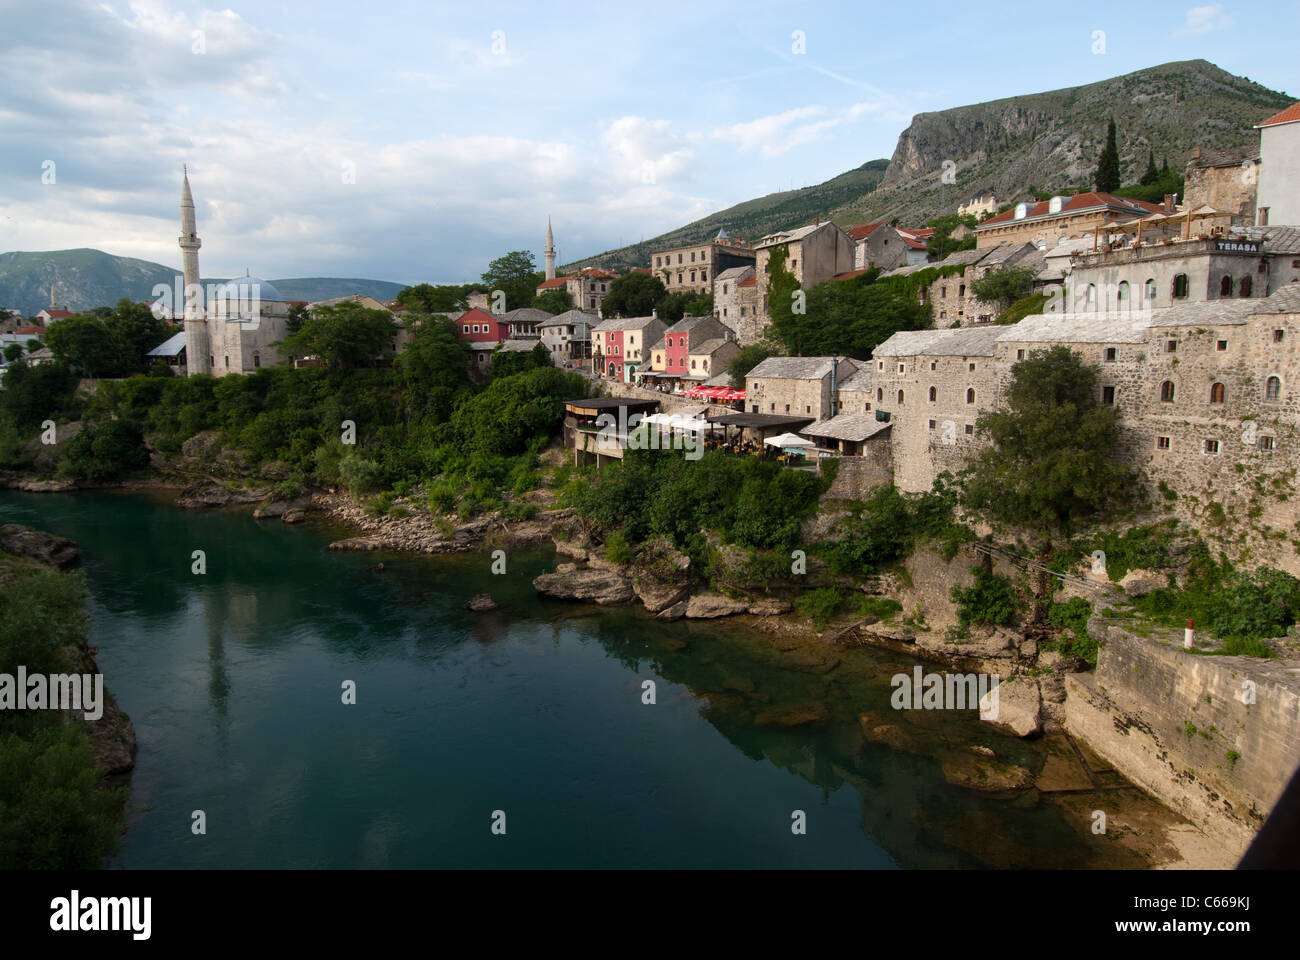 Old town Mostar with Koskin-Mehmed Pasha mosque and Neretva river, Bosnia and Herzegovina Stock Photo